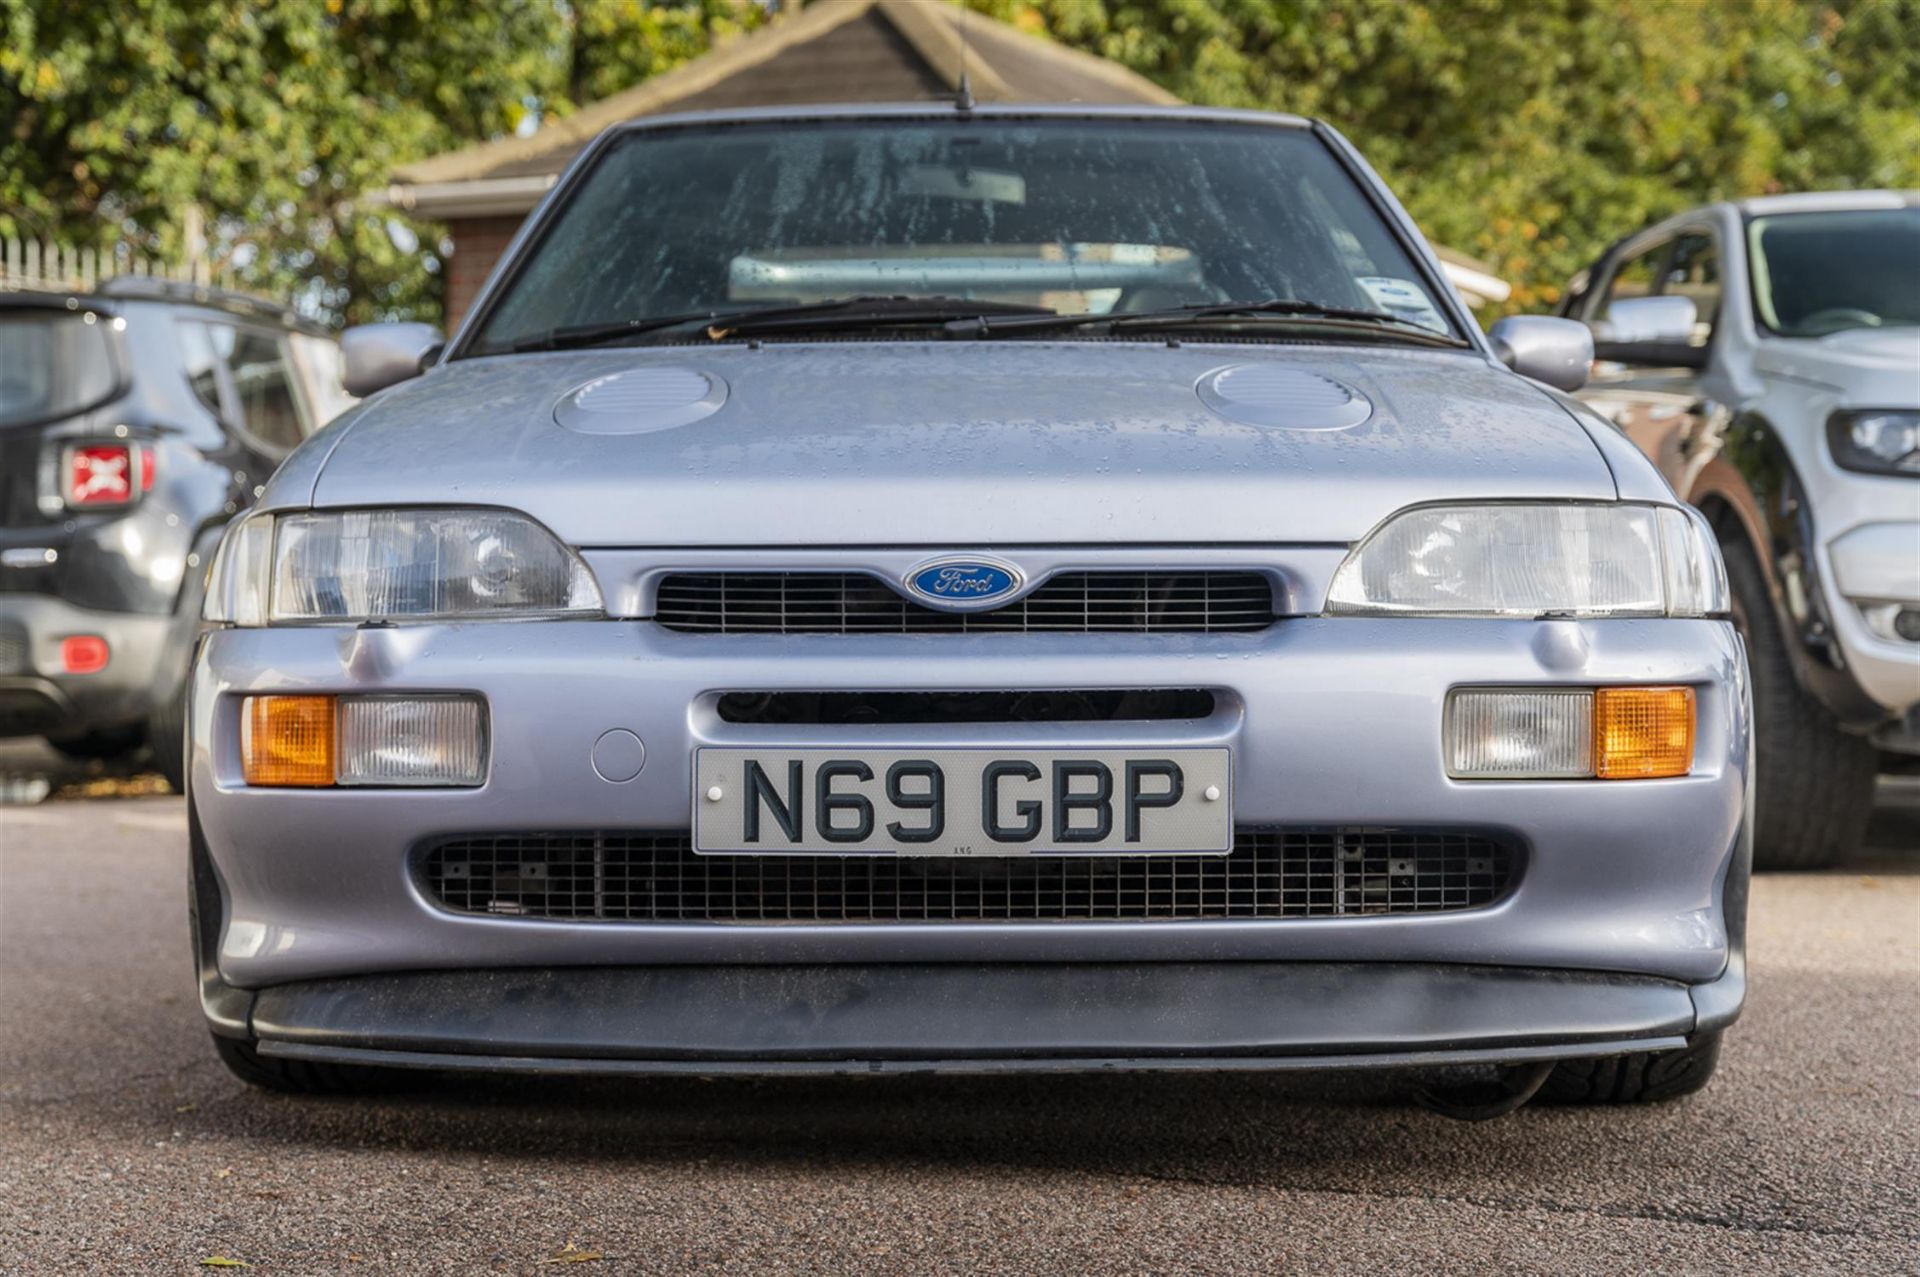 1996 Ford Escort RS Cosworth Lux - Image 6 of 10